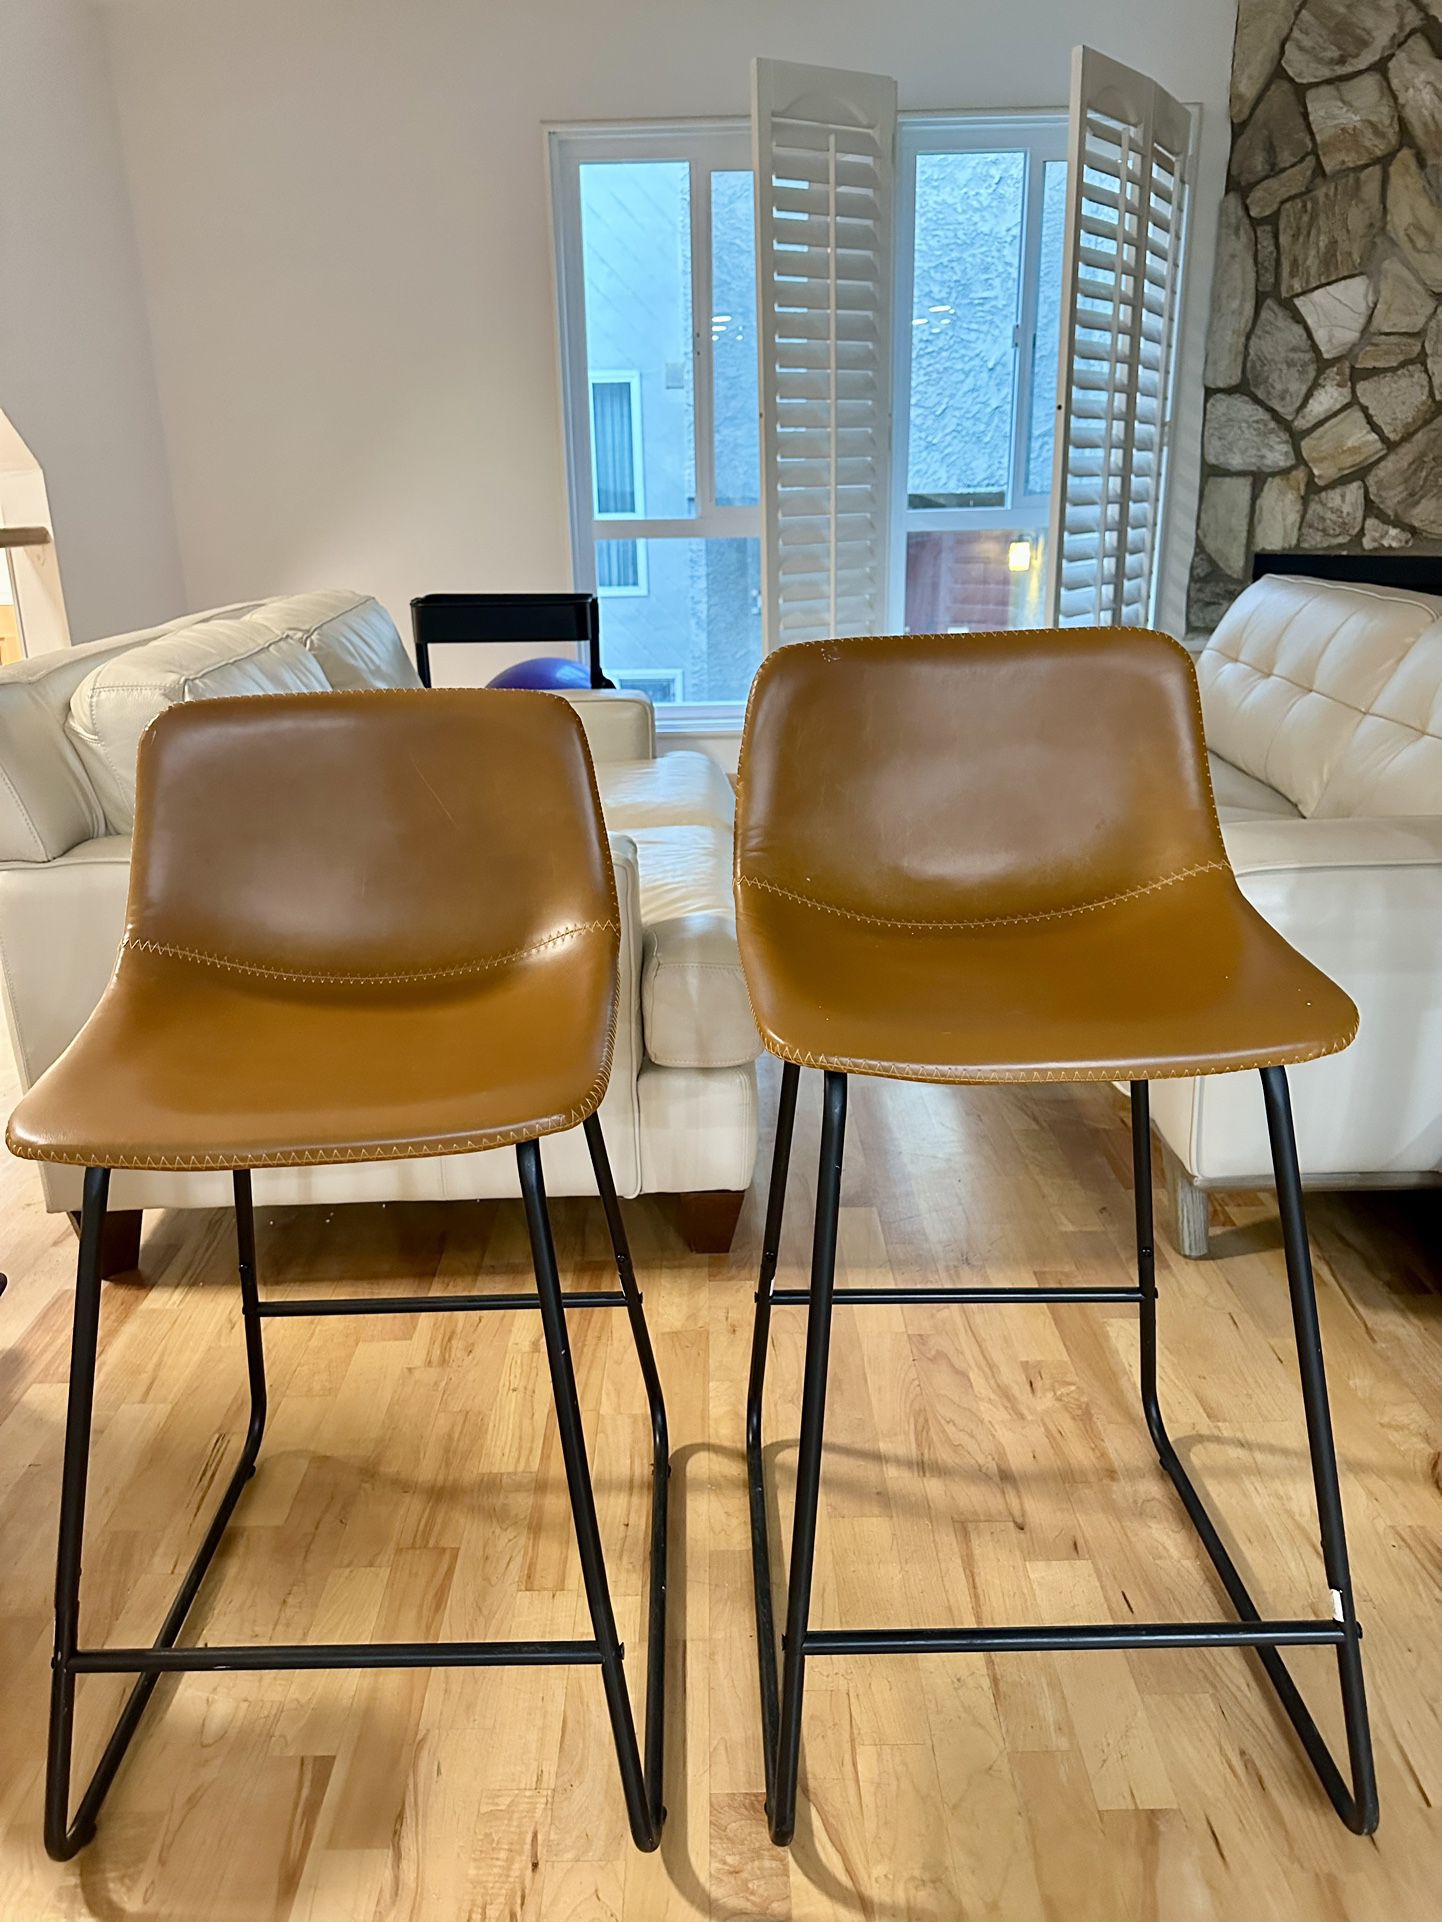 Brown Modern Counter Stools, set of two - $79